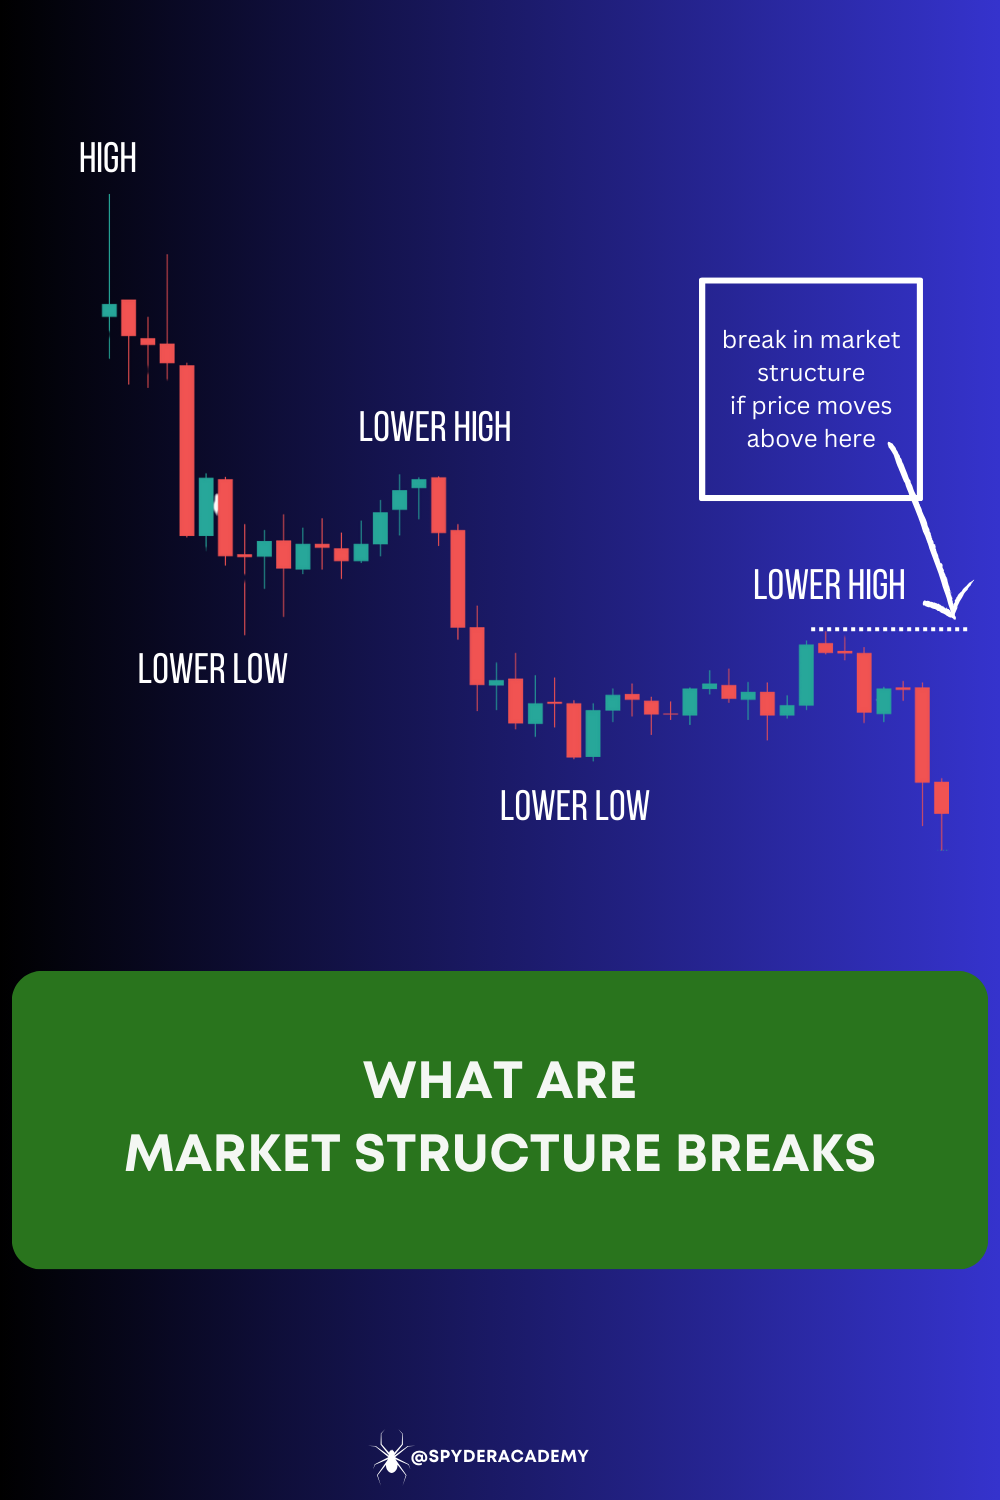 Market structure breaks, a phenomenon in financial markets, hold significant implications for traders and investors alike. Understanding these breaks is essential for adapting to evolving market dynamics and making informed decisions.